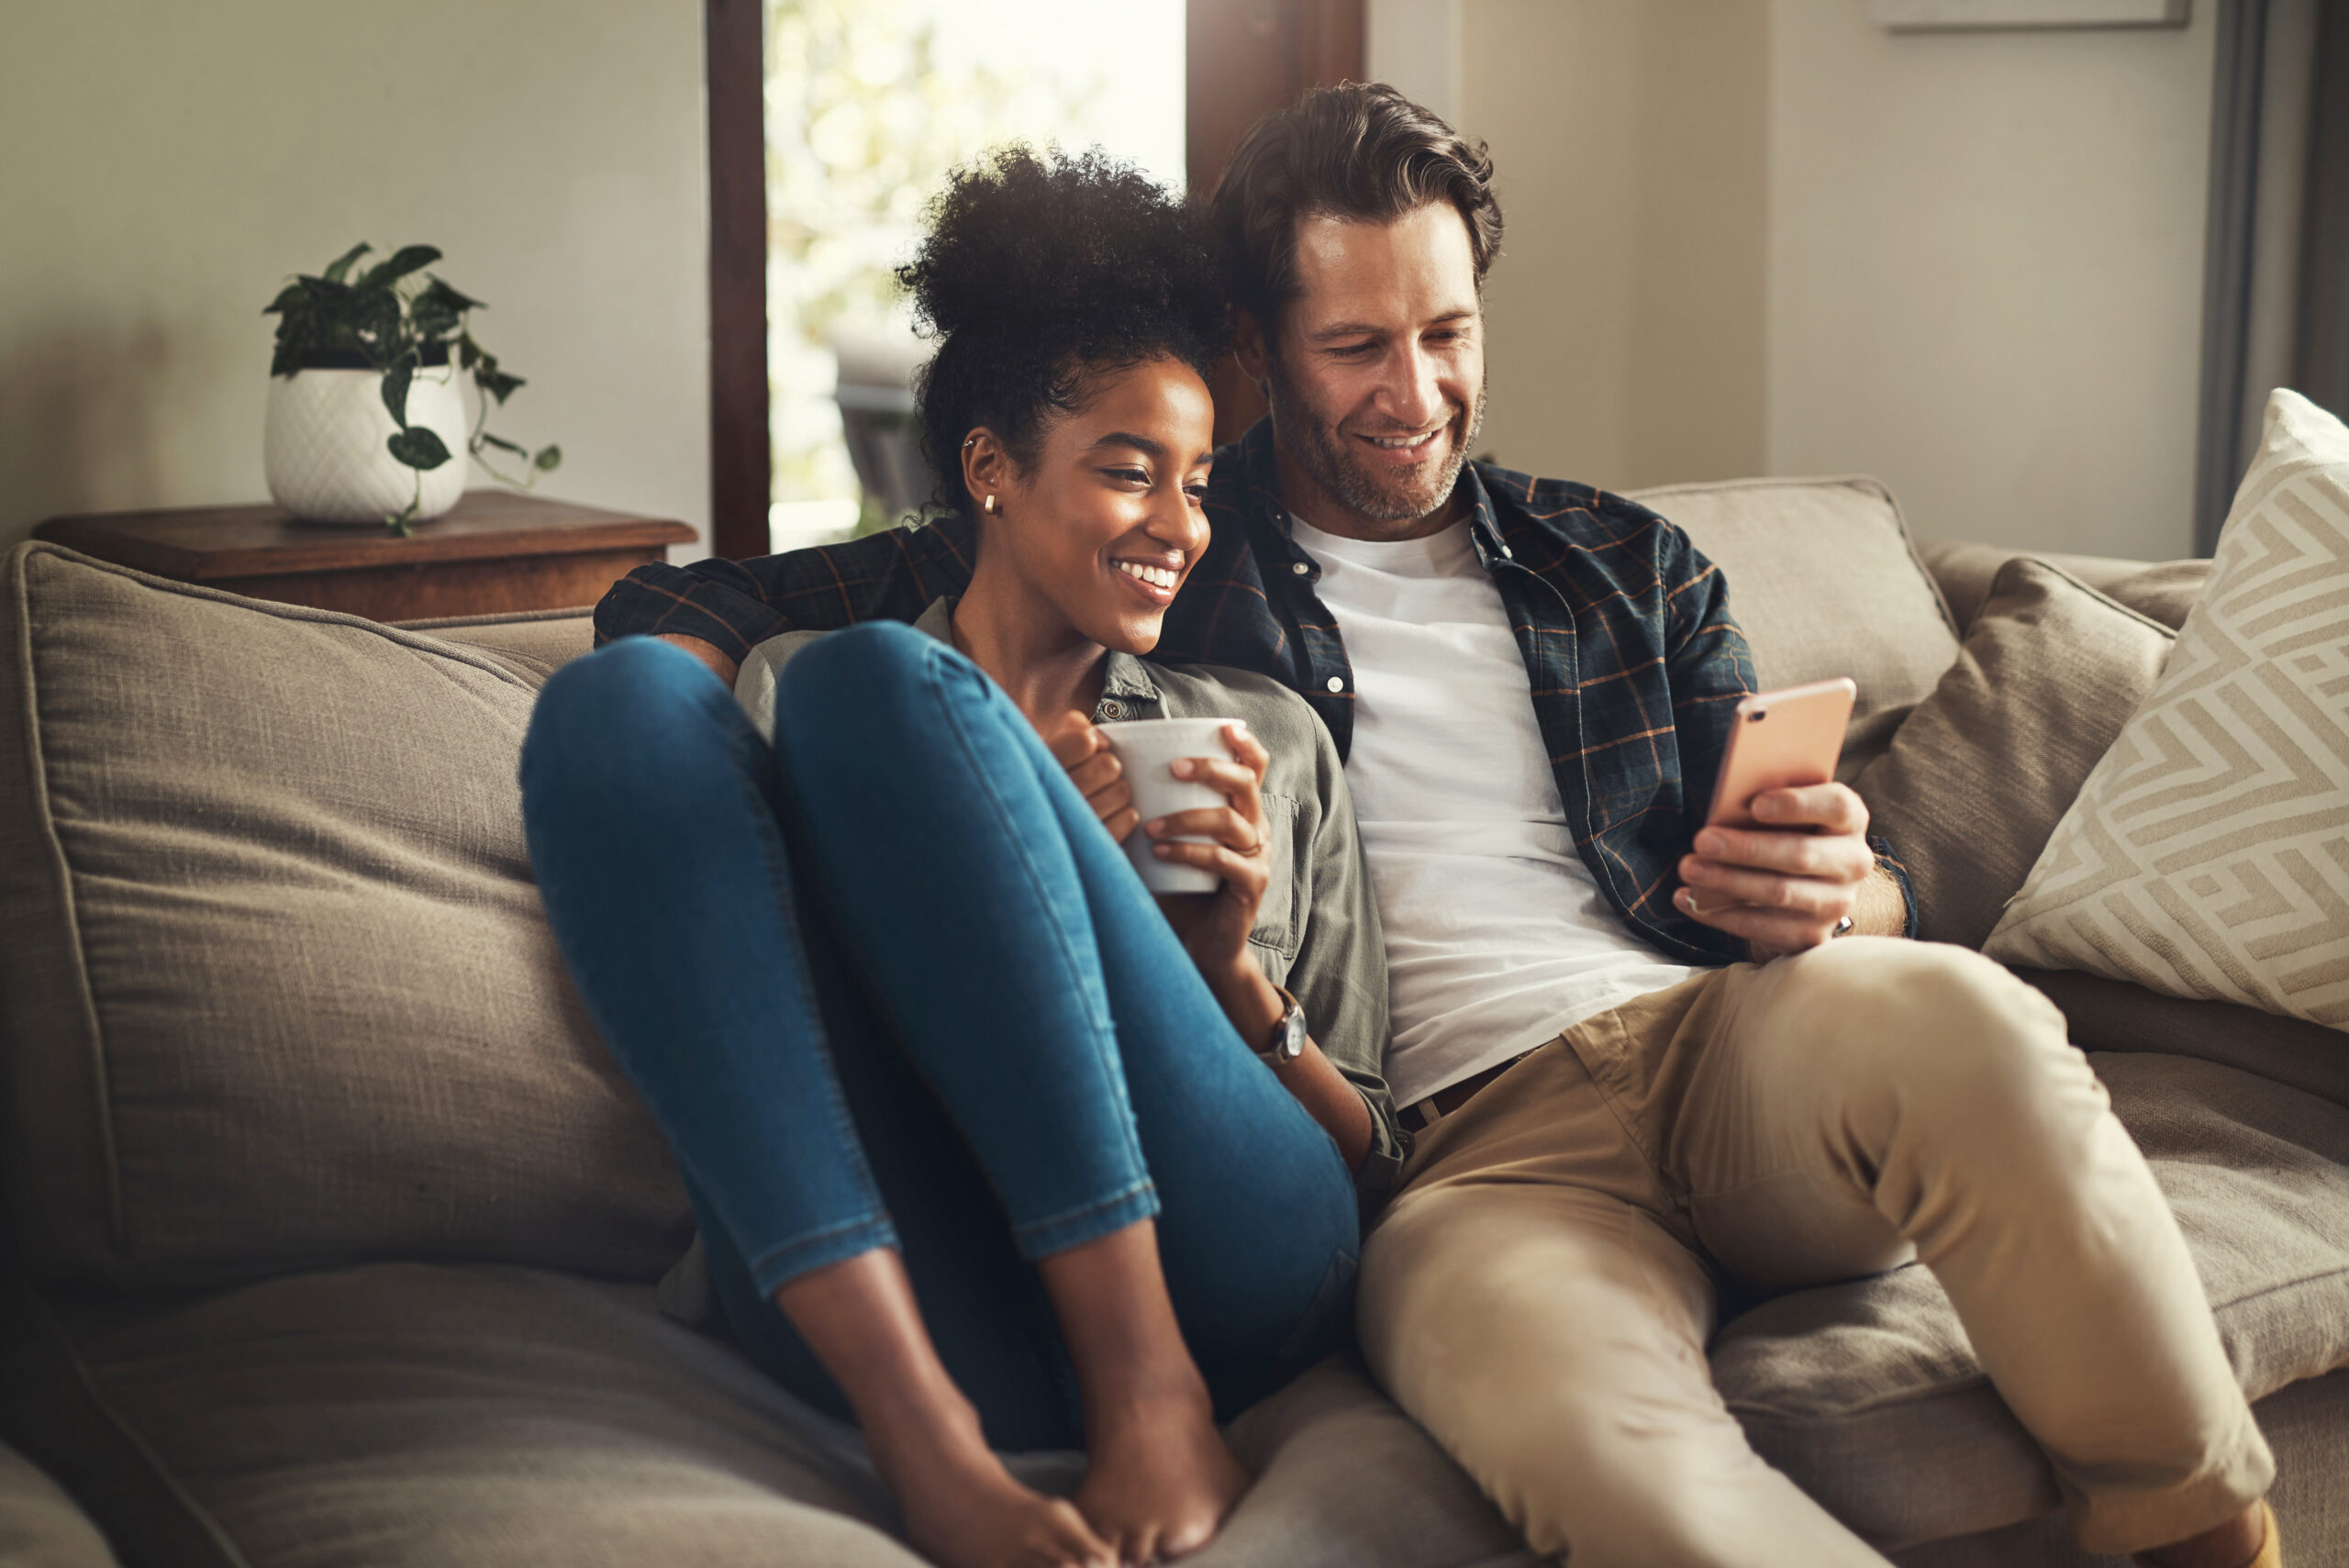 Young couple sitting on couch and looking at digital tablet, smiling.